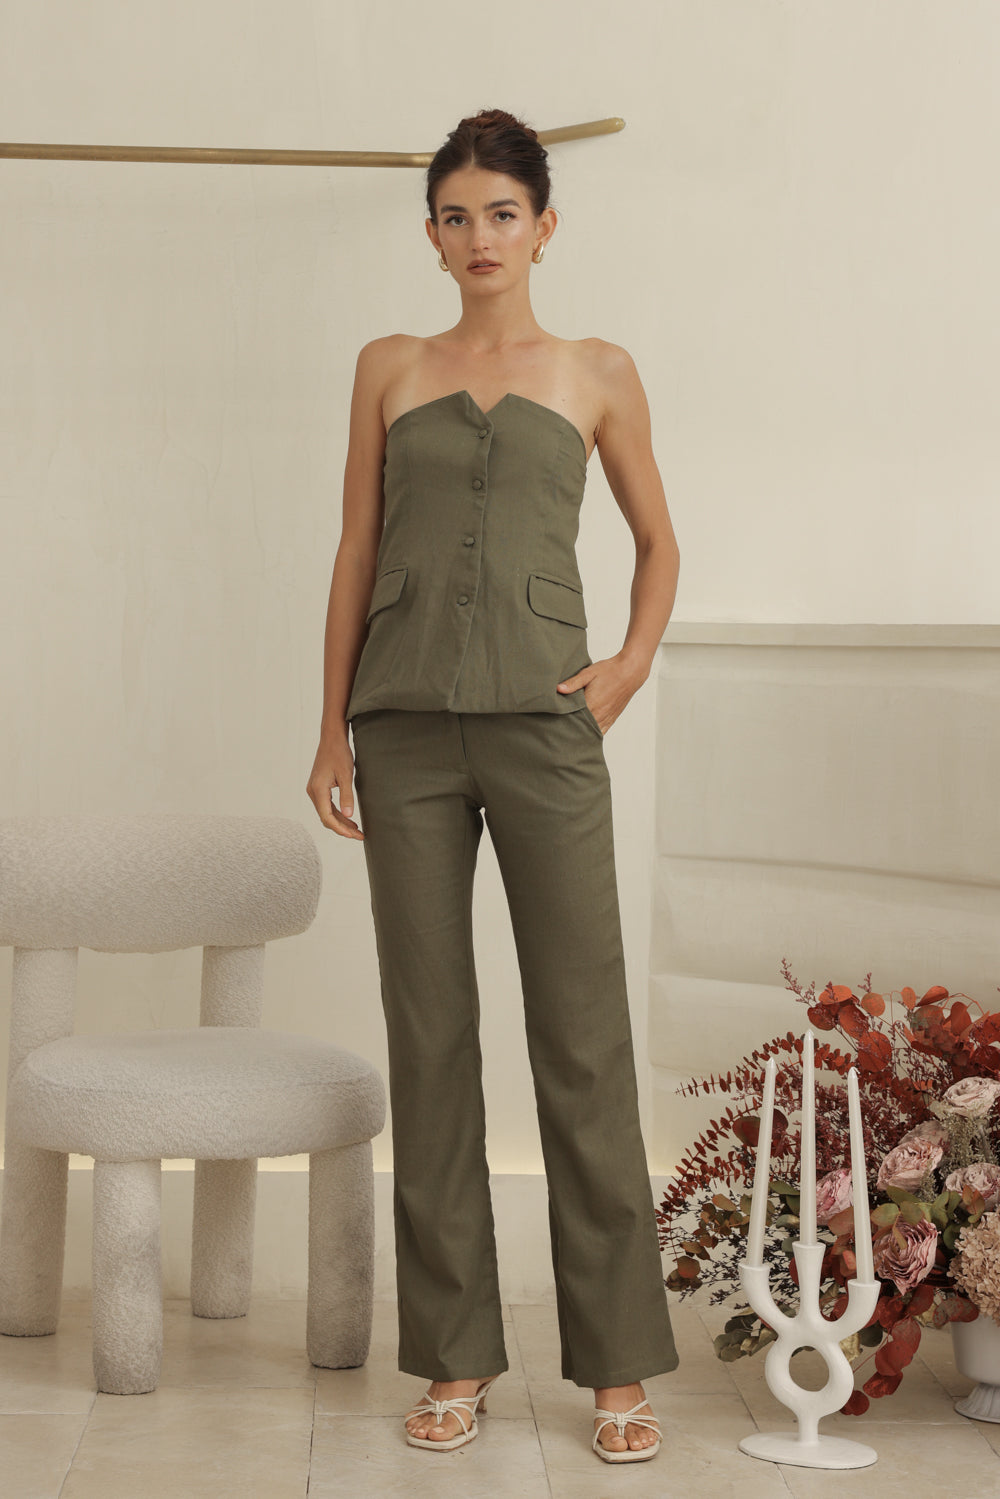 ROMILLY PANT SET Strapless Suit Top and Straight Cut Trouser (Olive Linen)